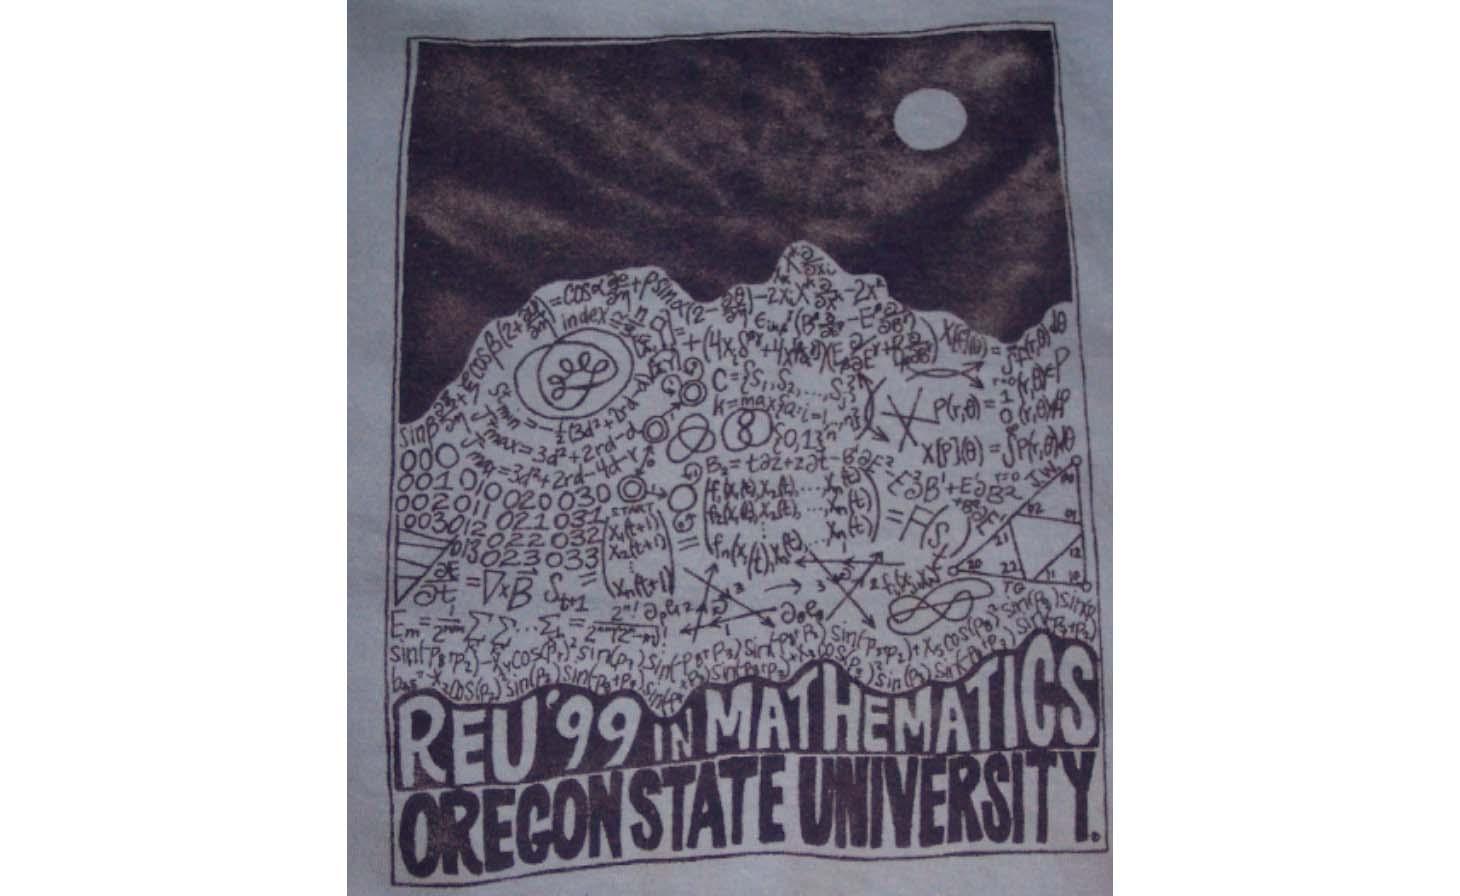 The front image of the OSU REU t shirt in 1999.